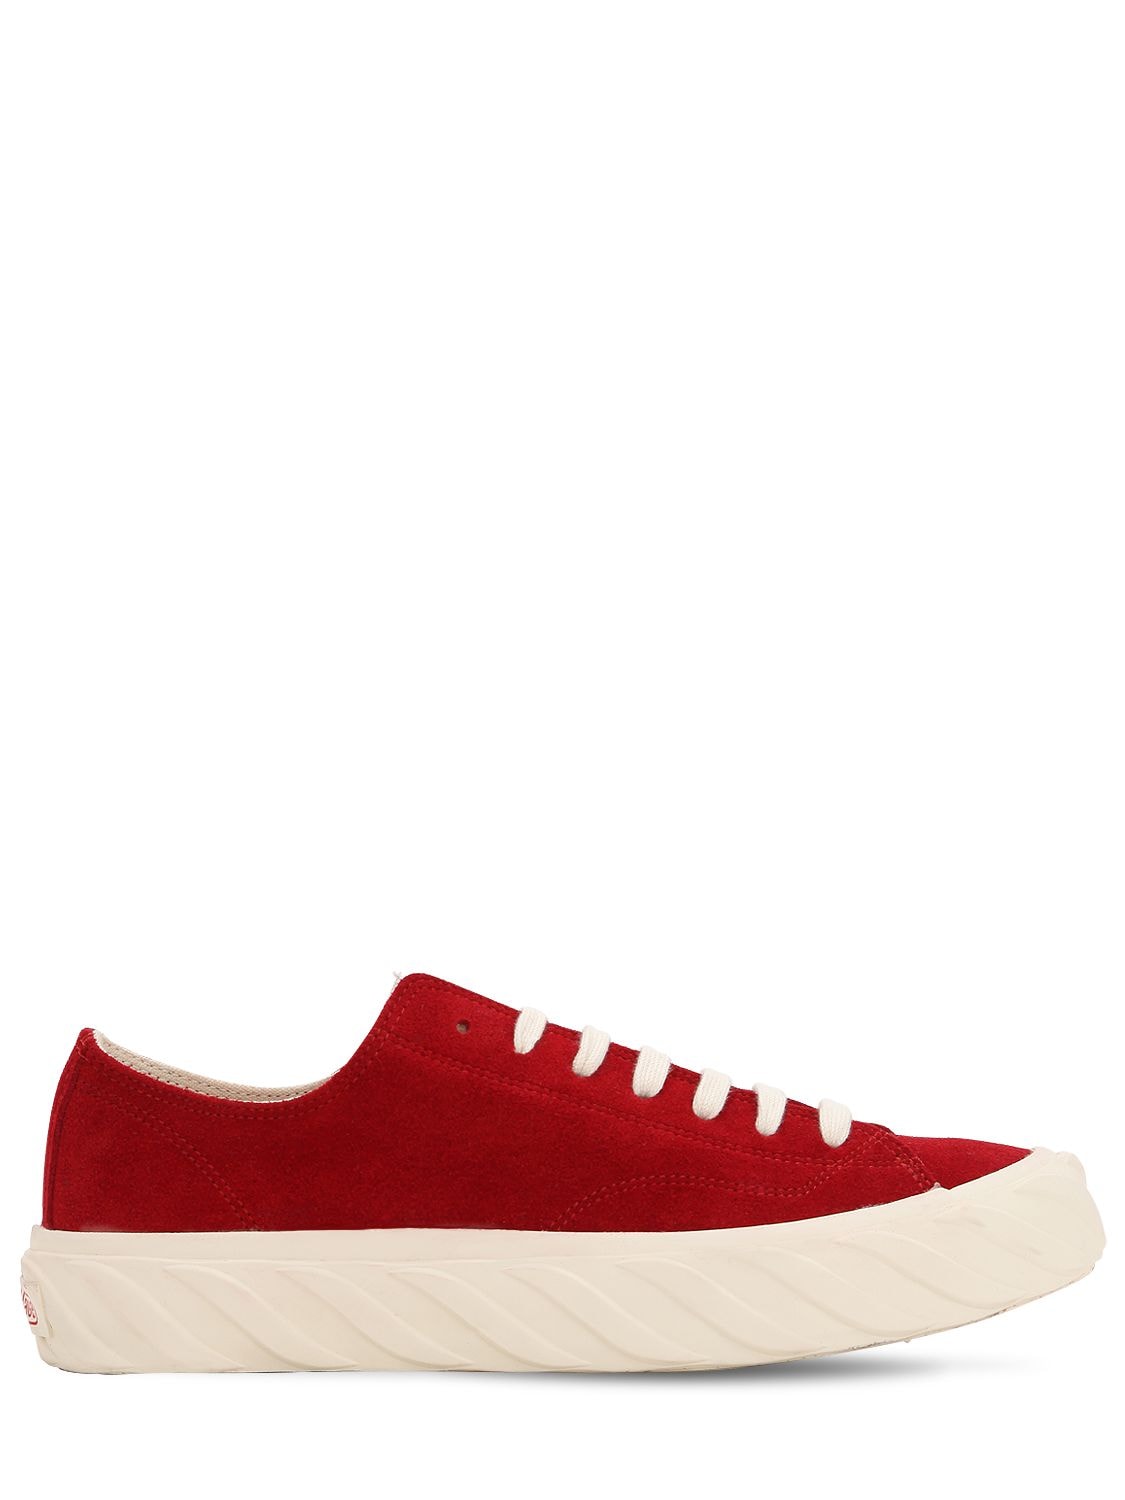 Age - Across To Genuine Era Low Cotton Canvas Sneakers In Red